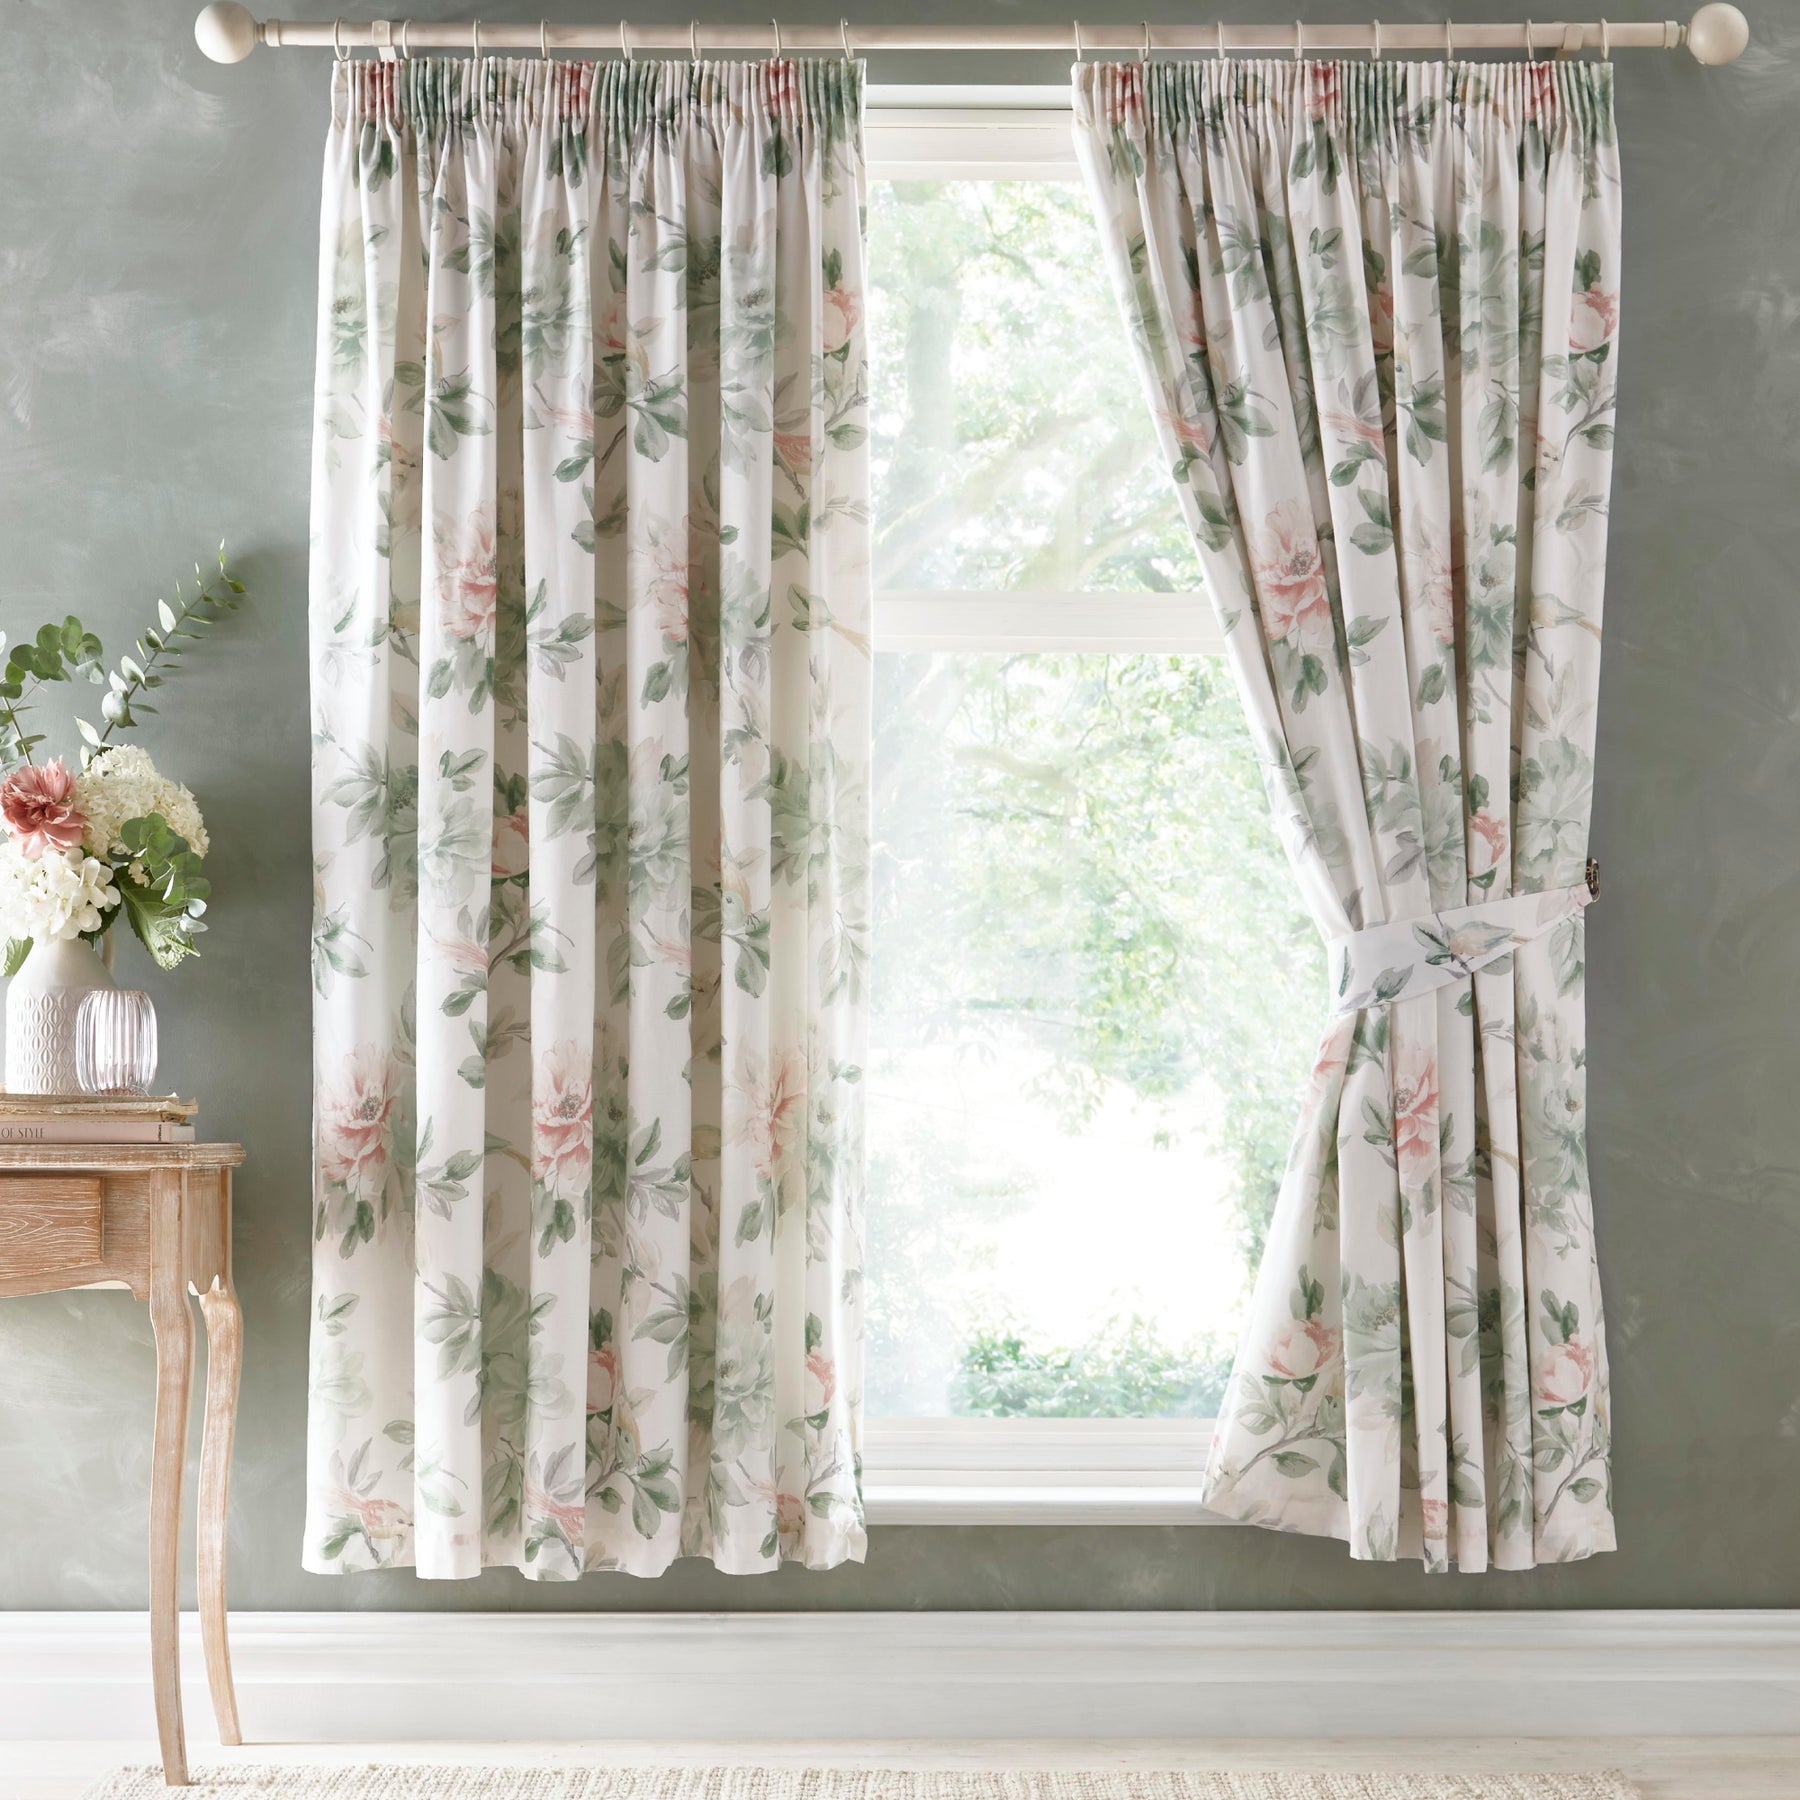 Appletree Campion Ready Made Curtains Green Coral